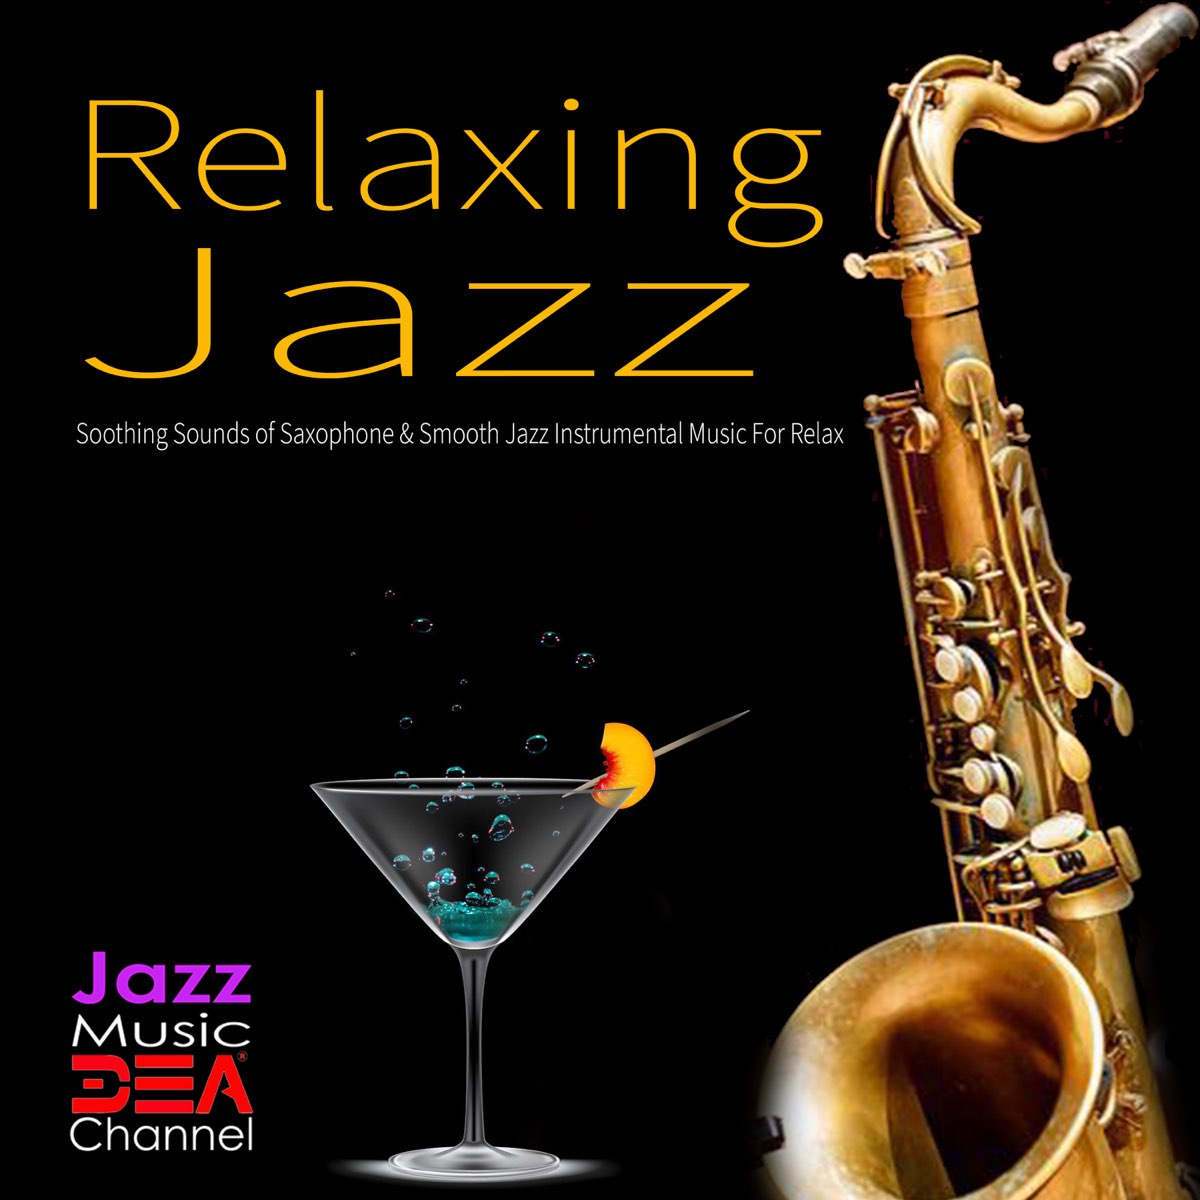 Relaxing Jazz: Soothing Sounds of Saxophone & Smooth Jazz Instrumental Music  For Relax - Album by Jazz 2 Relax, CafeRelax & Jazz Music DEA Channel -  Apple Music